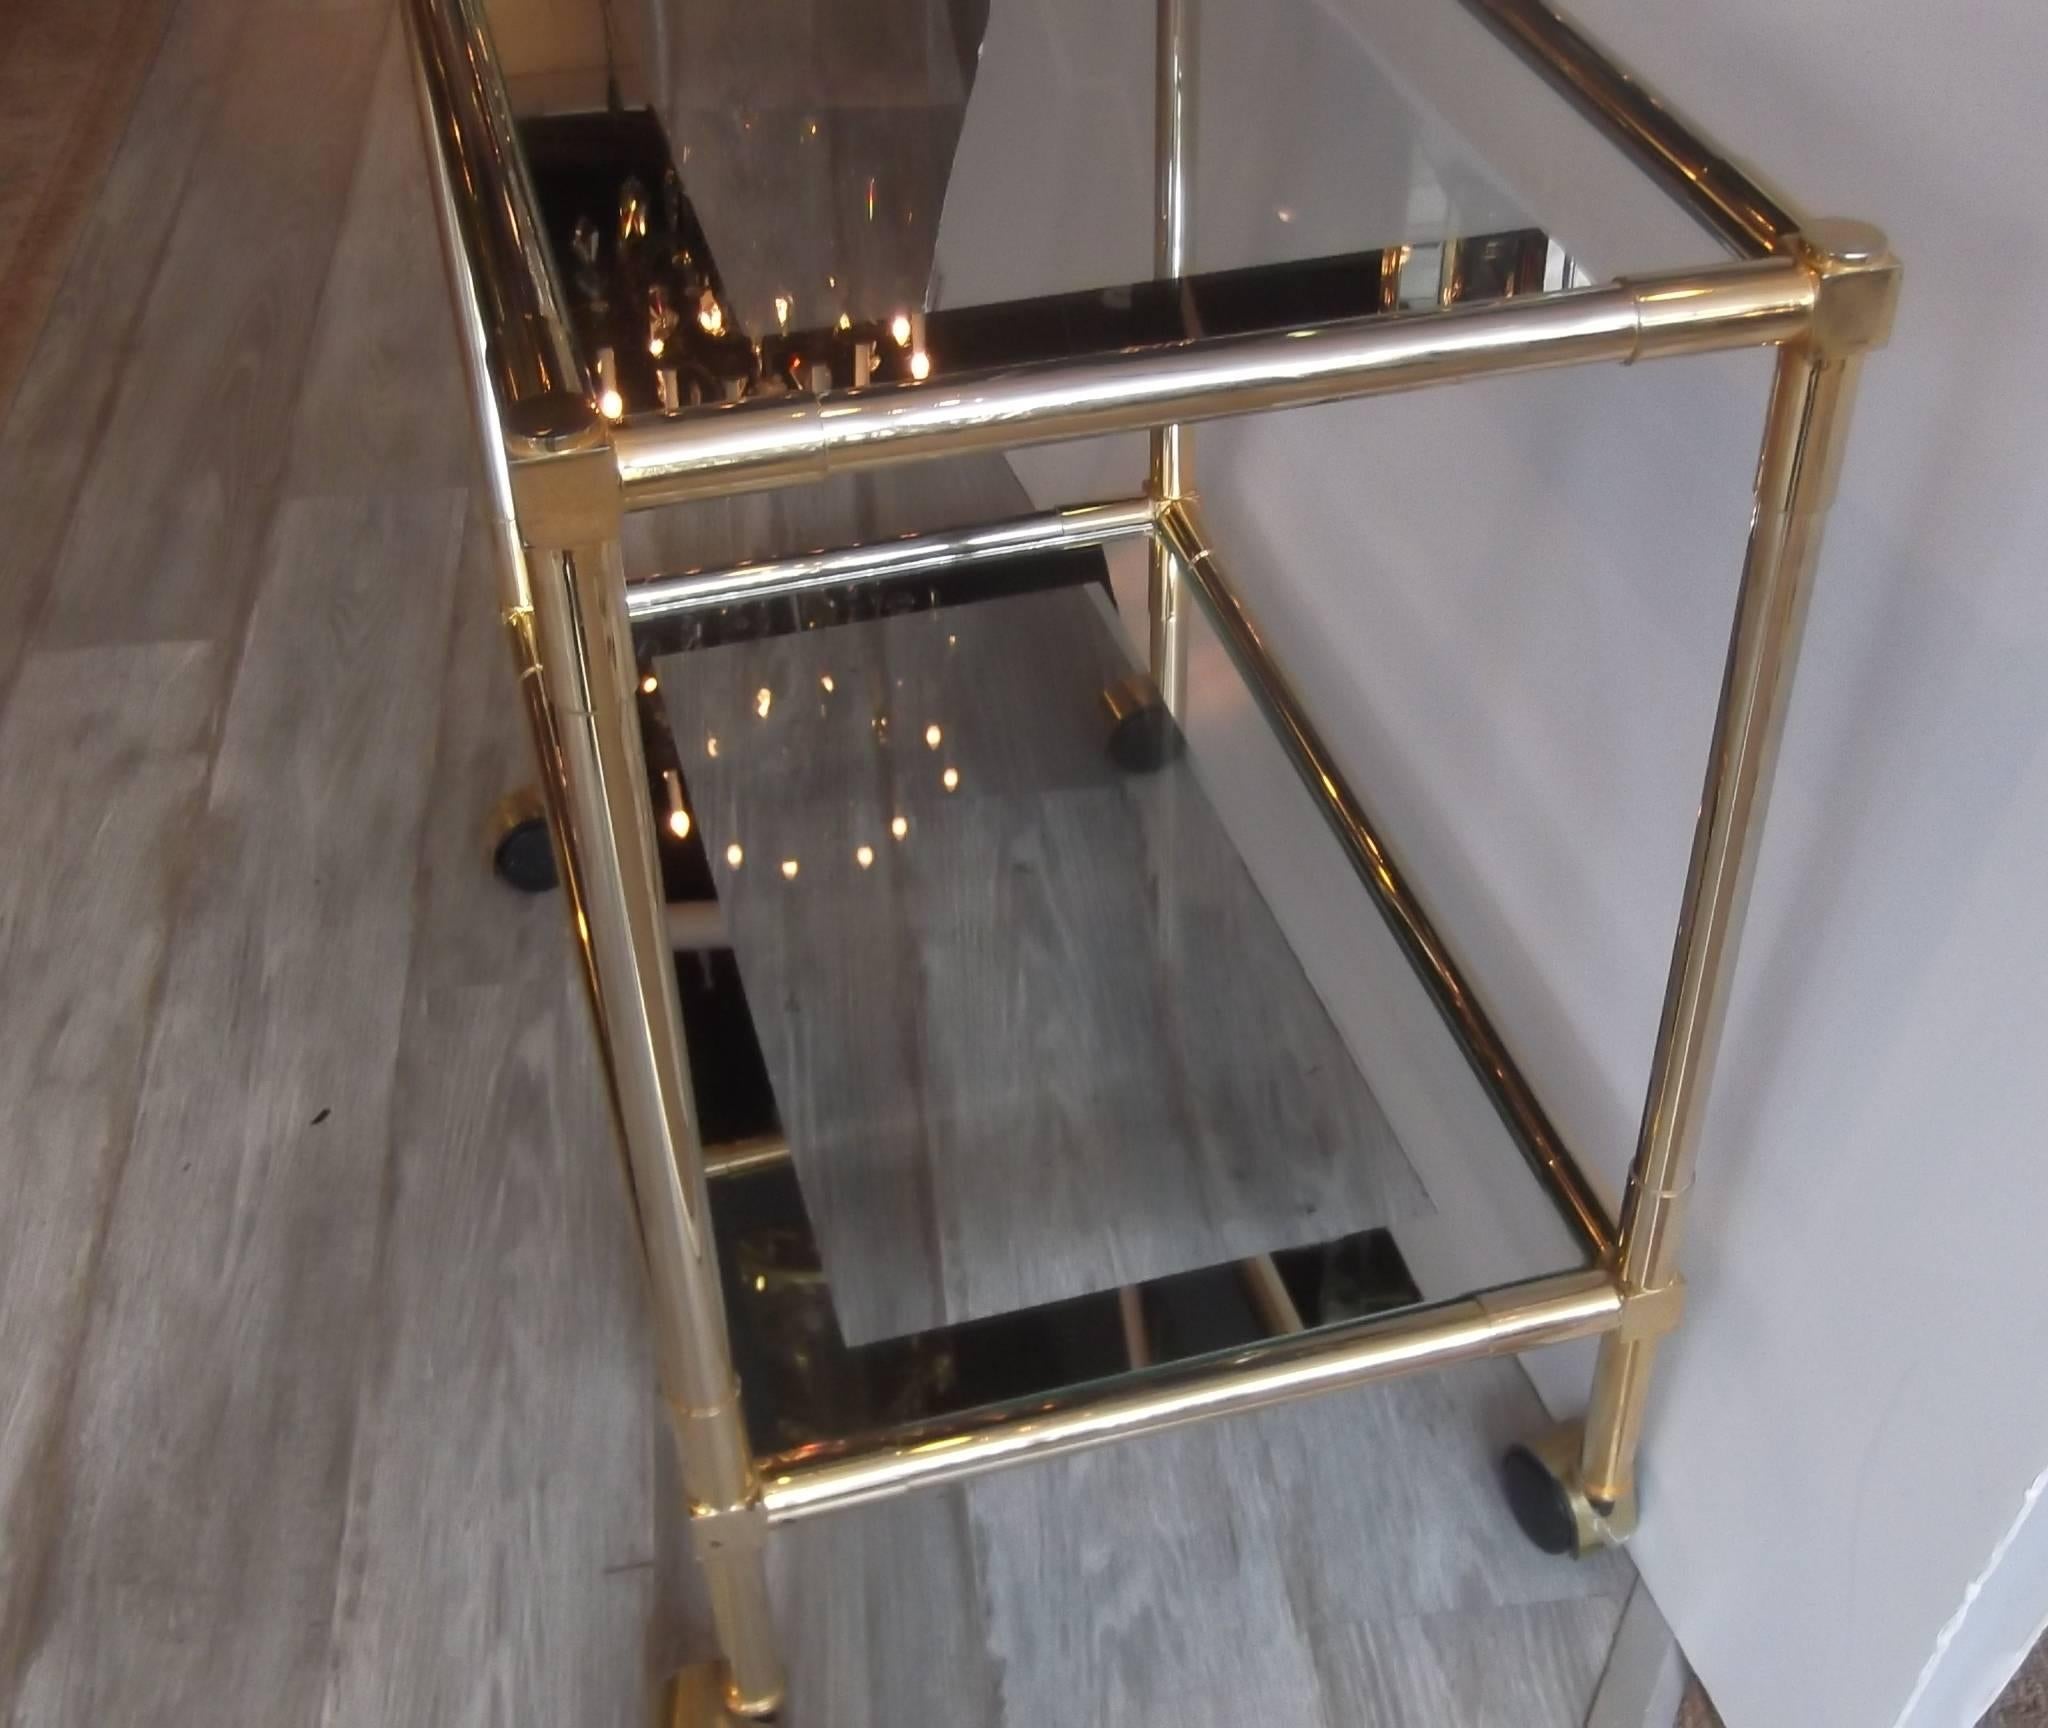 Very stylish brass-plated steel bar cart. Two-tiered with shelves trimmed with a 1.5